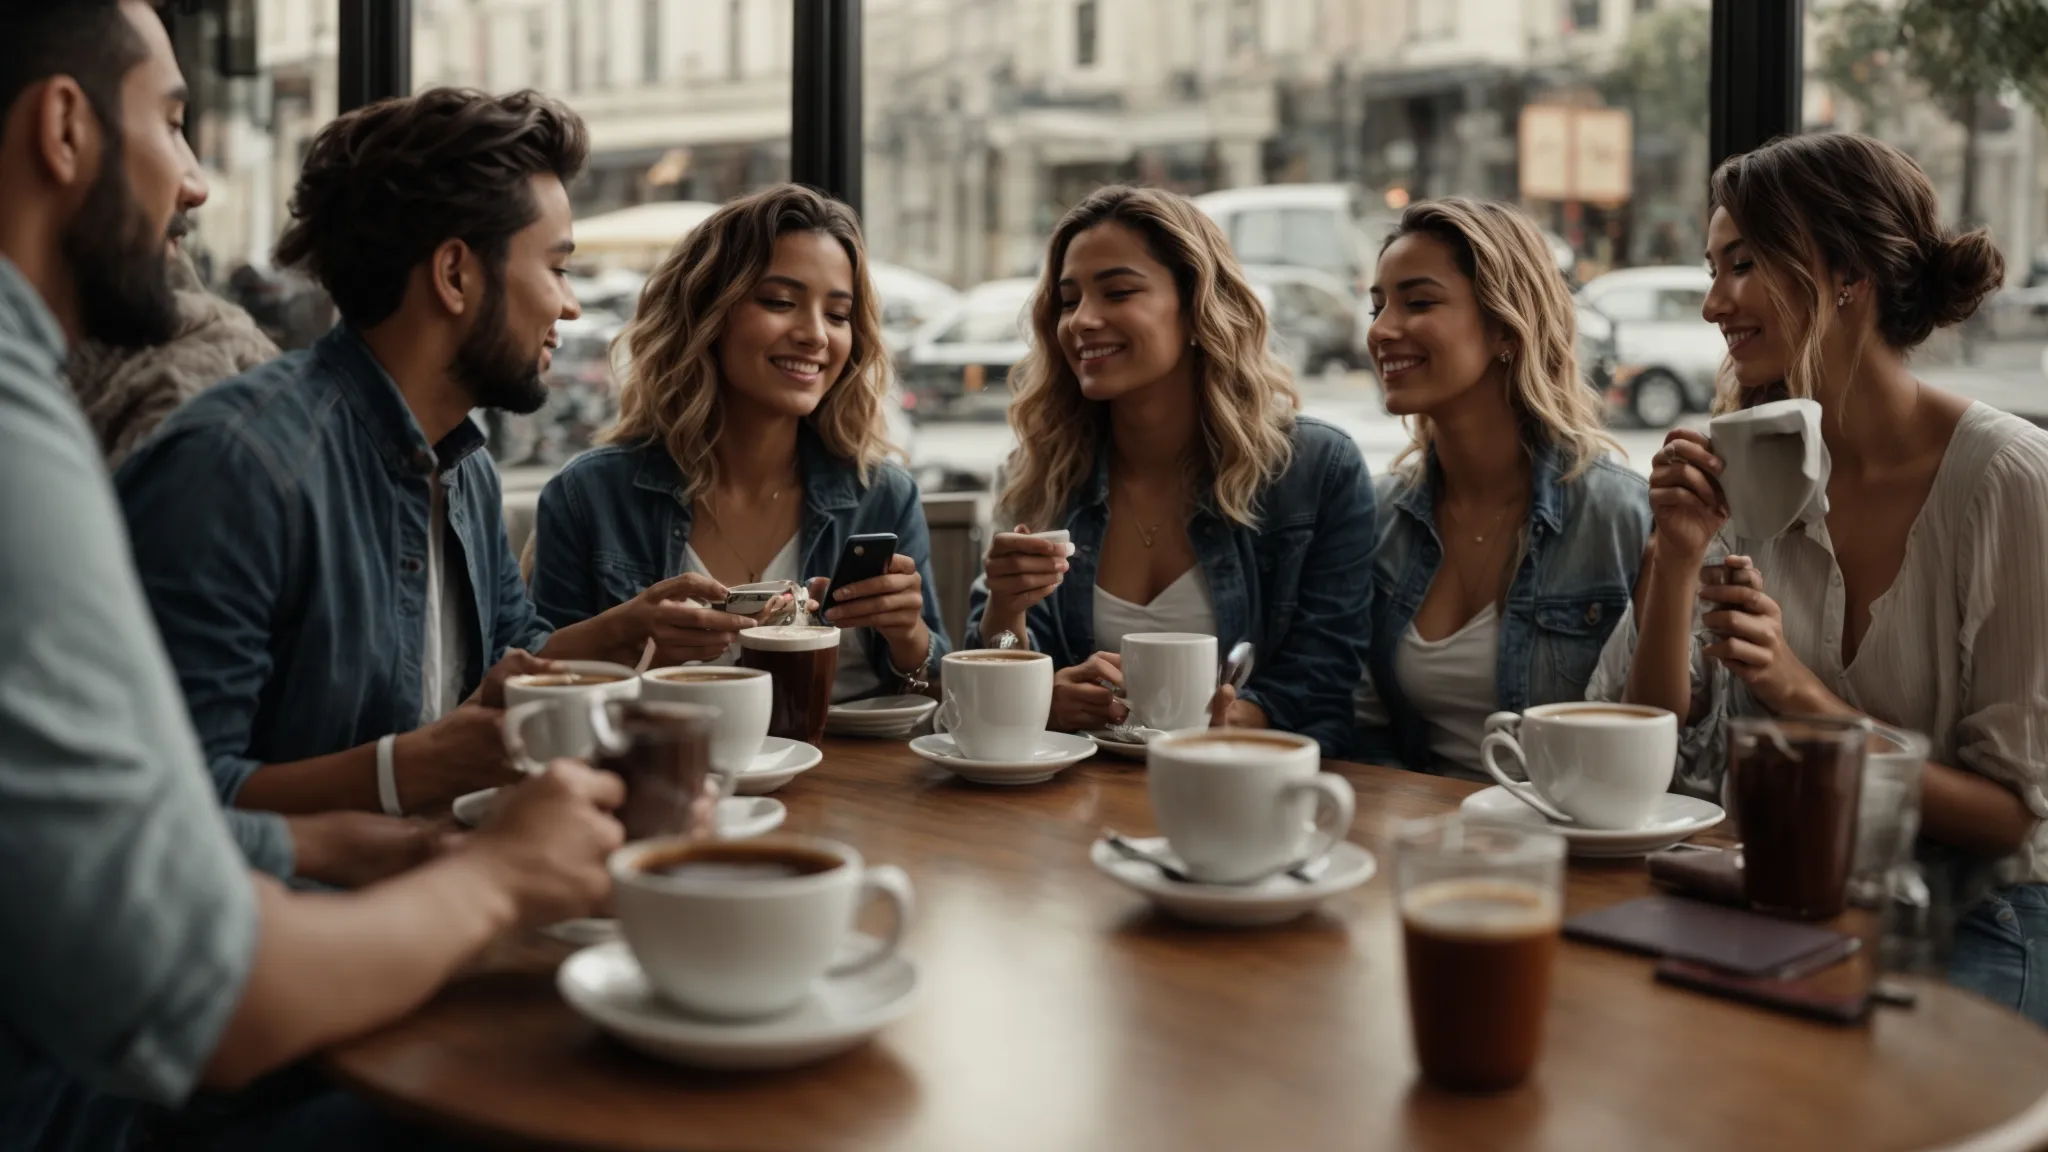 a satisfied group of customers sits around a cafe table, savoring coffee and engaging with their smartphones.